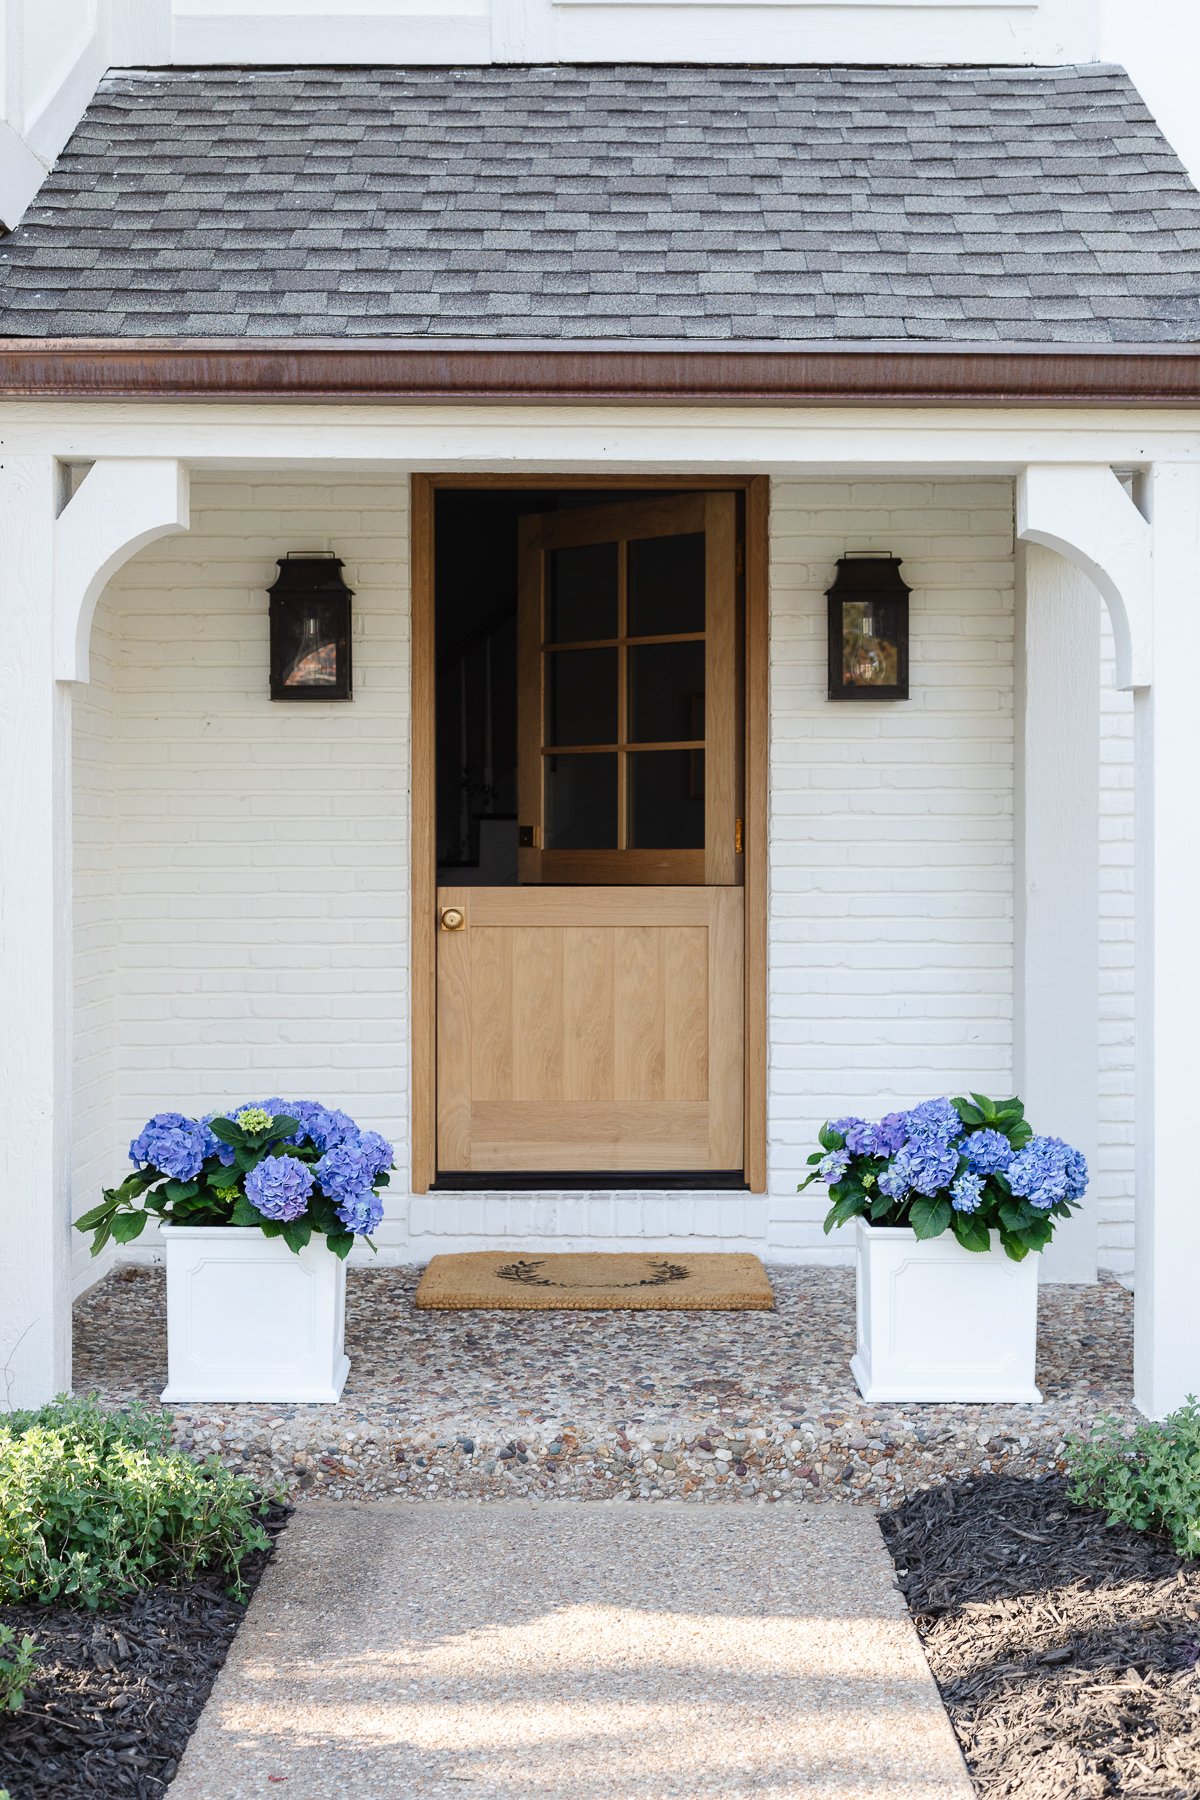 A white brick house with a wooden Dutch door and white planters on the spring porch, filled with blue hydrangeas. 